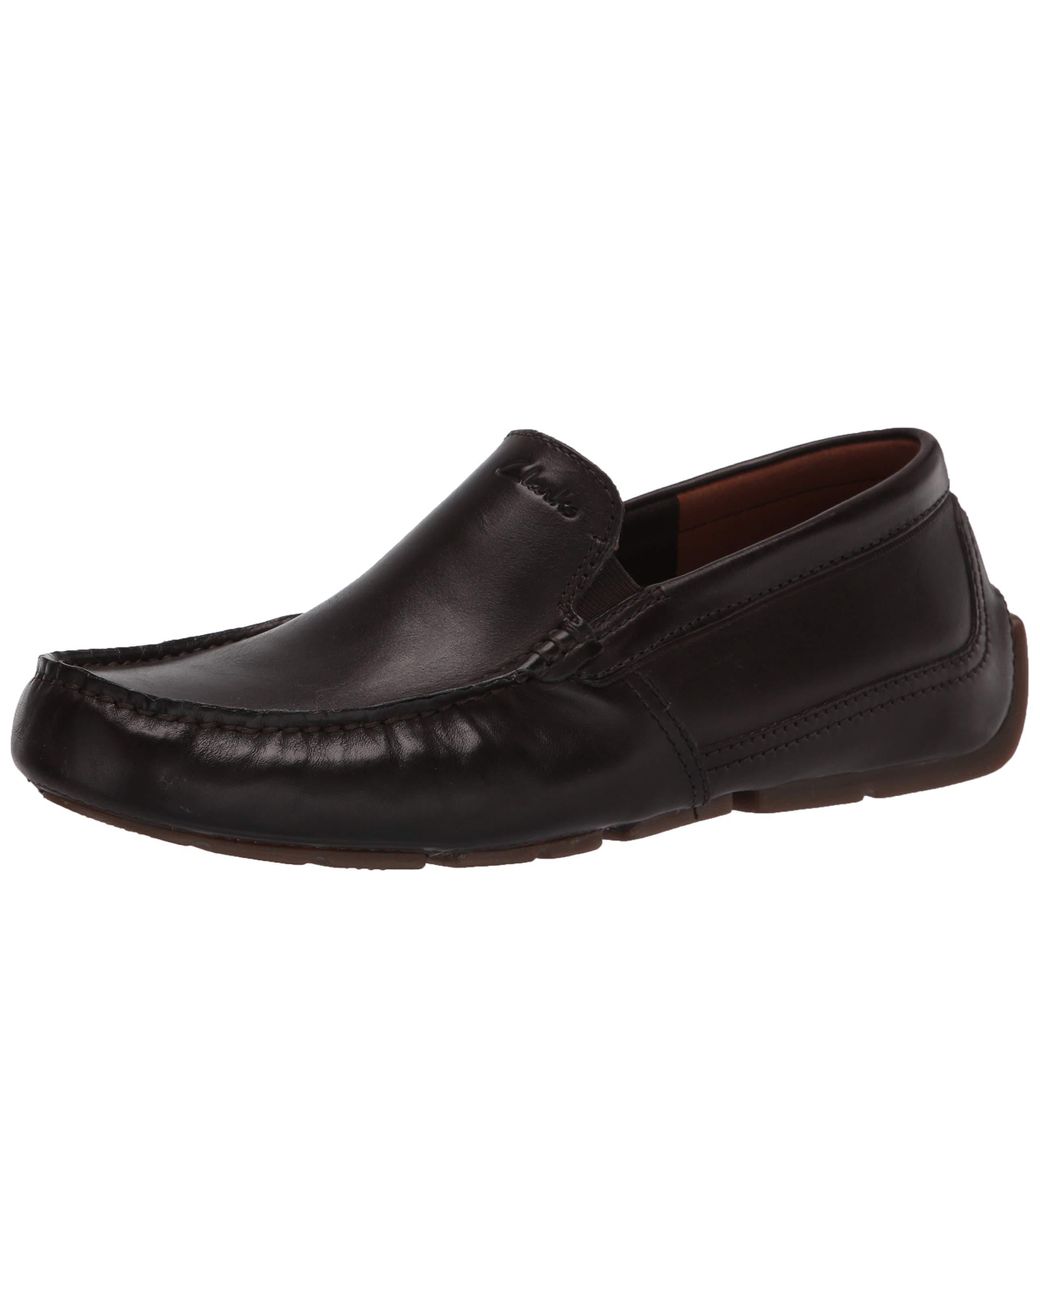 Clarks Rubber Mens Markman Plain Driving Style Loafer in Dark Brown ...